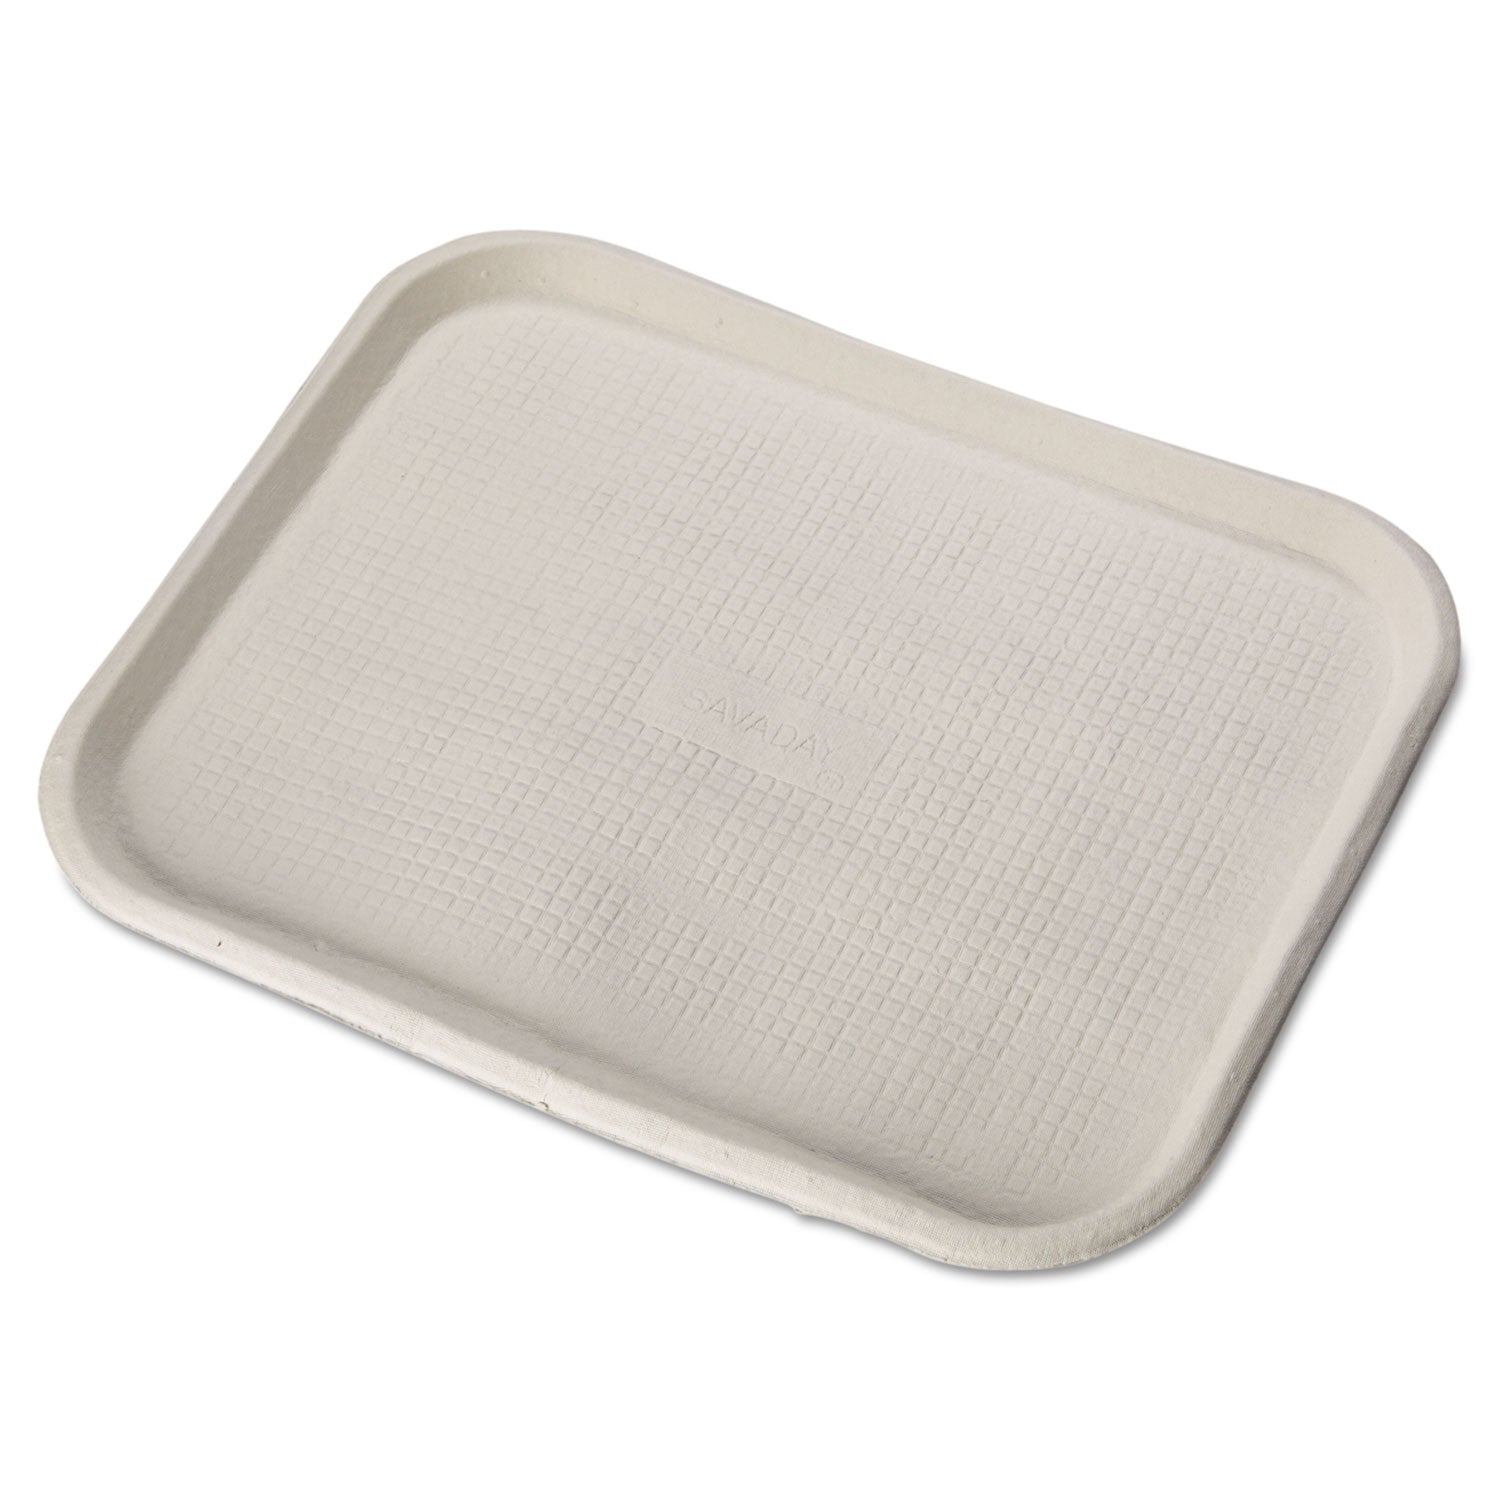 Savaday Molded Fiber Food Trays, 1-Compartment, 14 x 18, White, Paper, 100/Carton - 